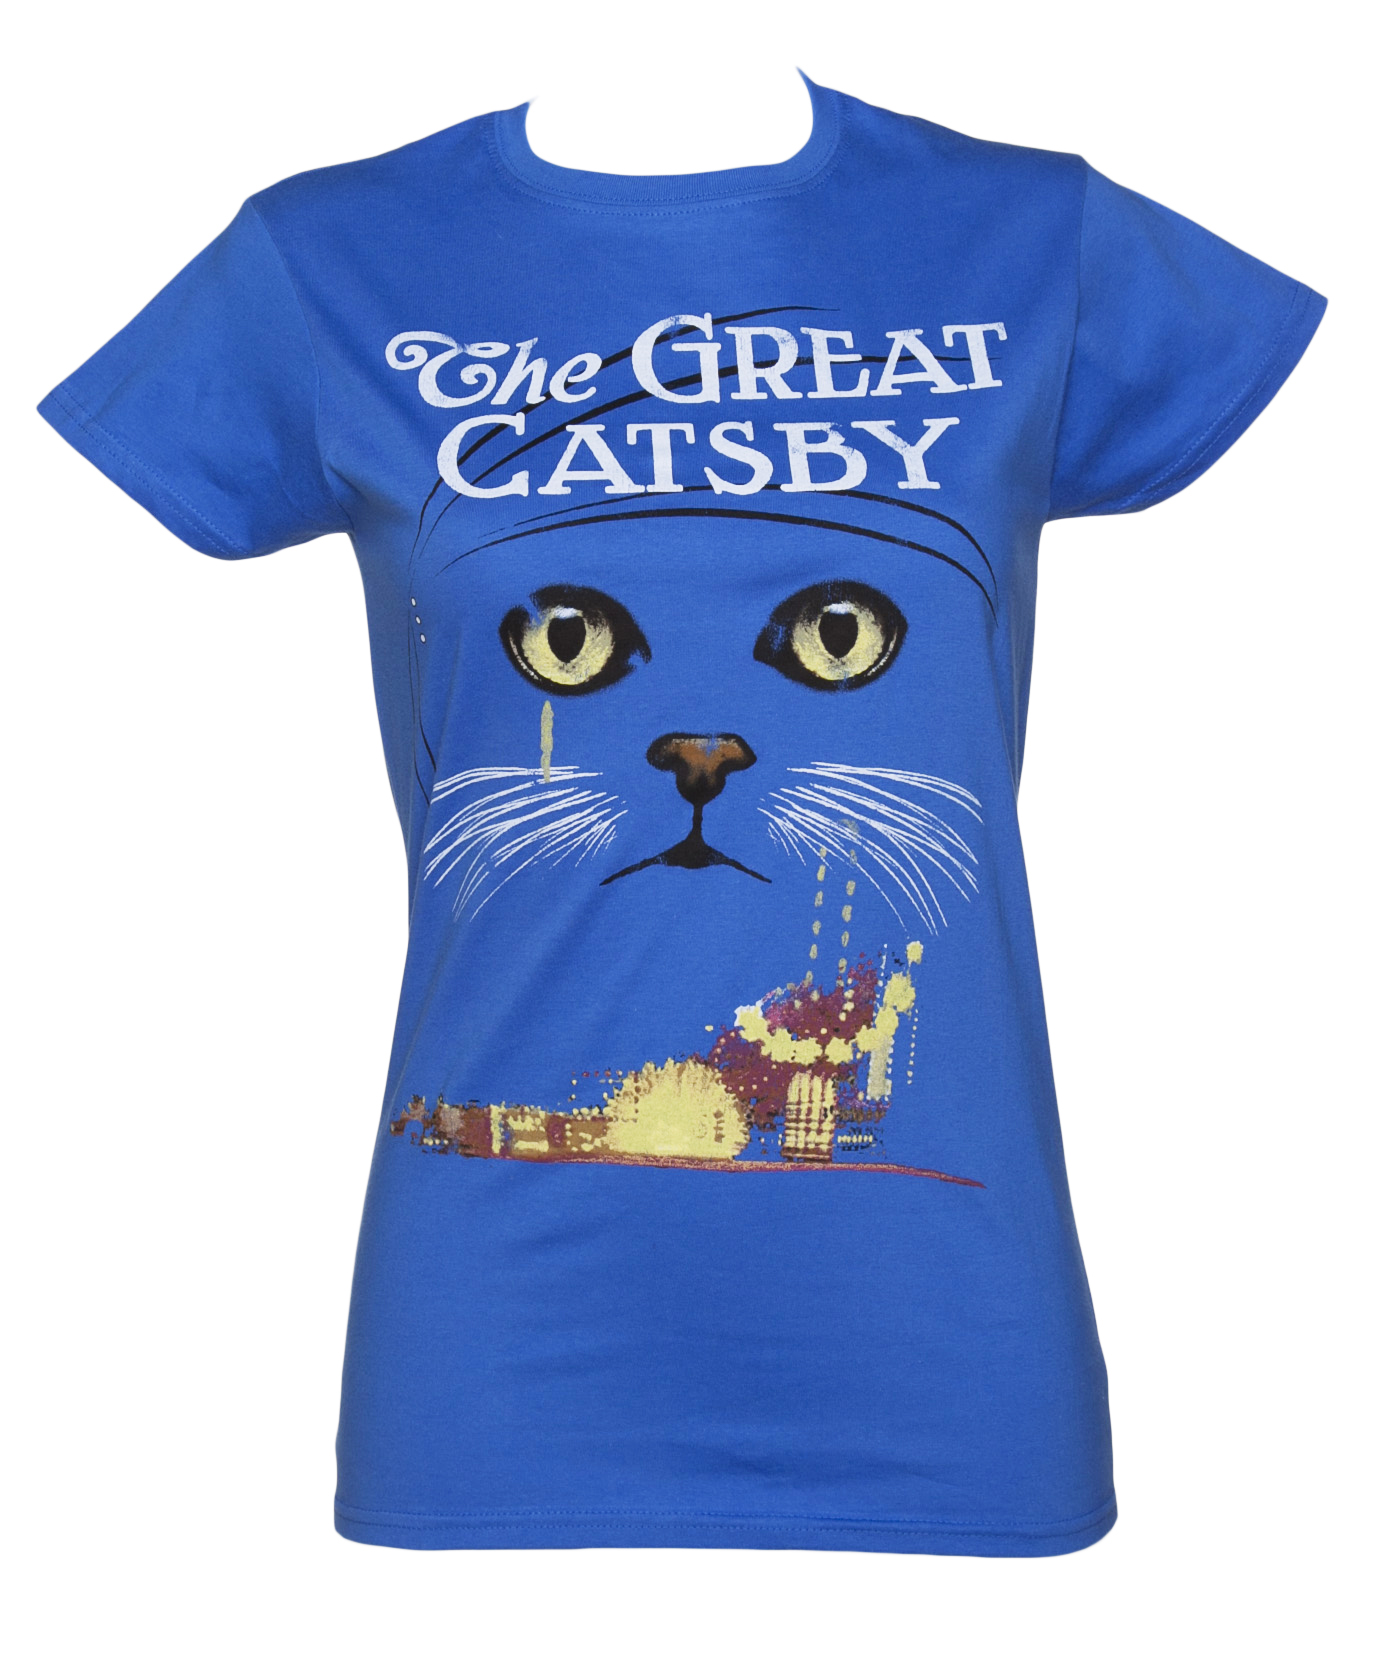 Ladies The Great Catsby T-Shirt